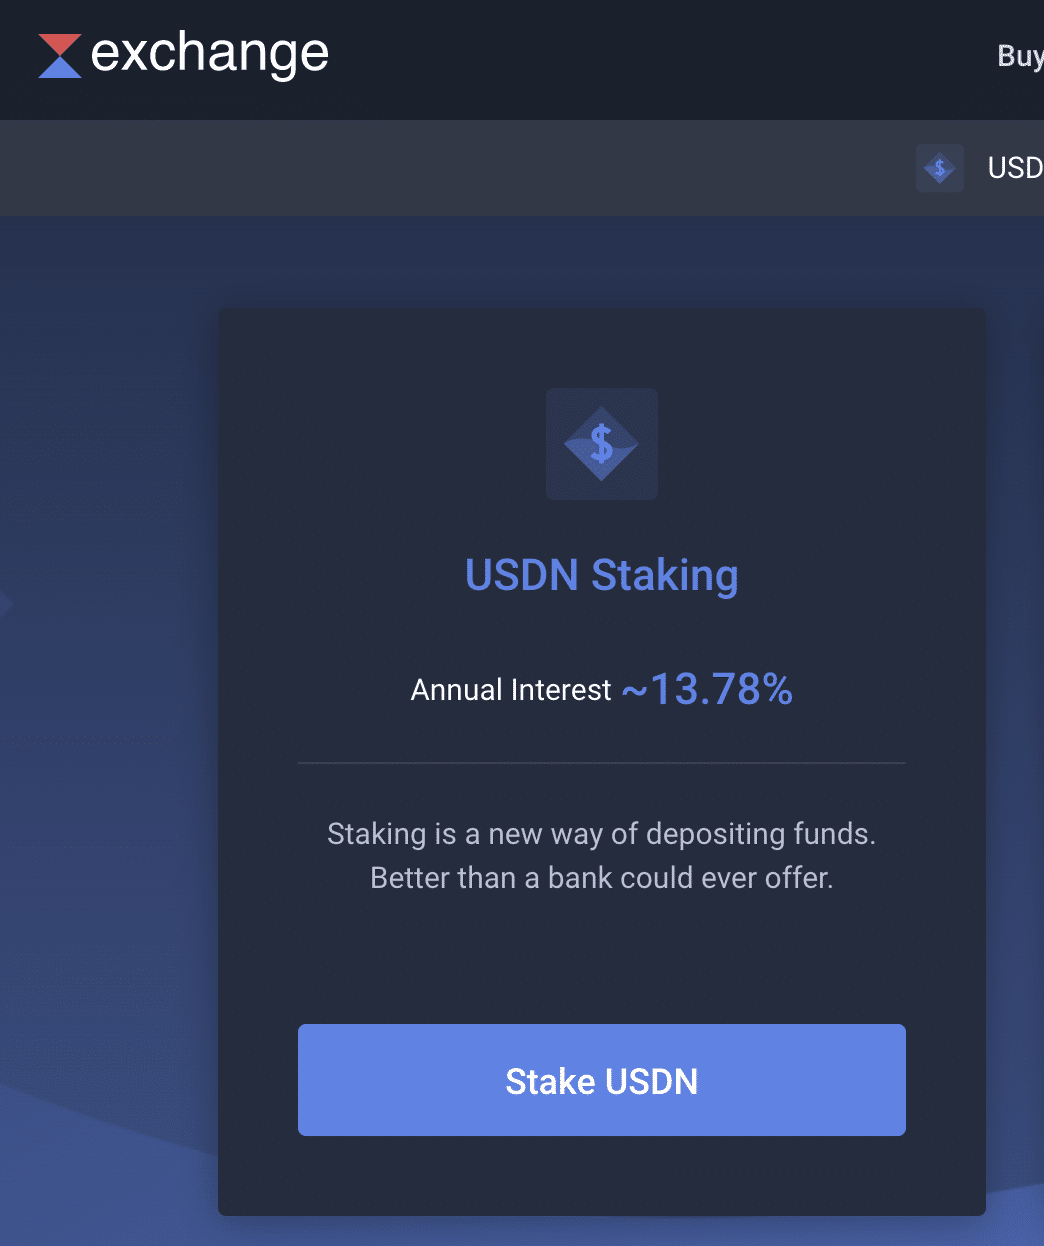 USDN staking